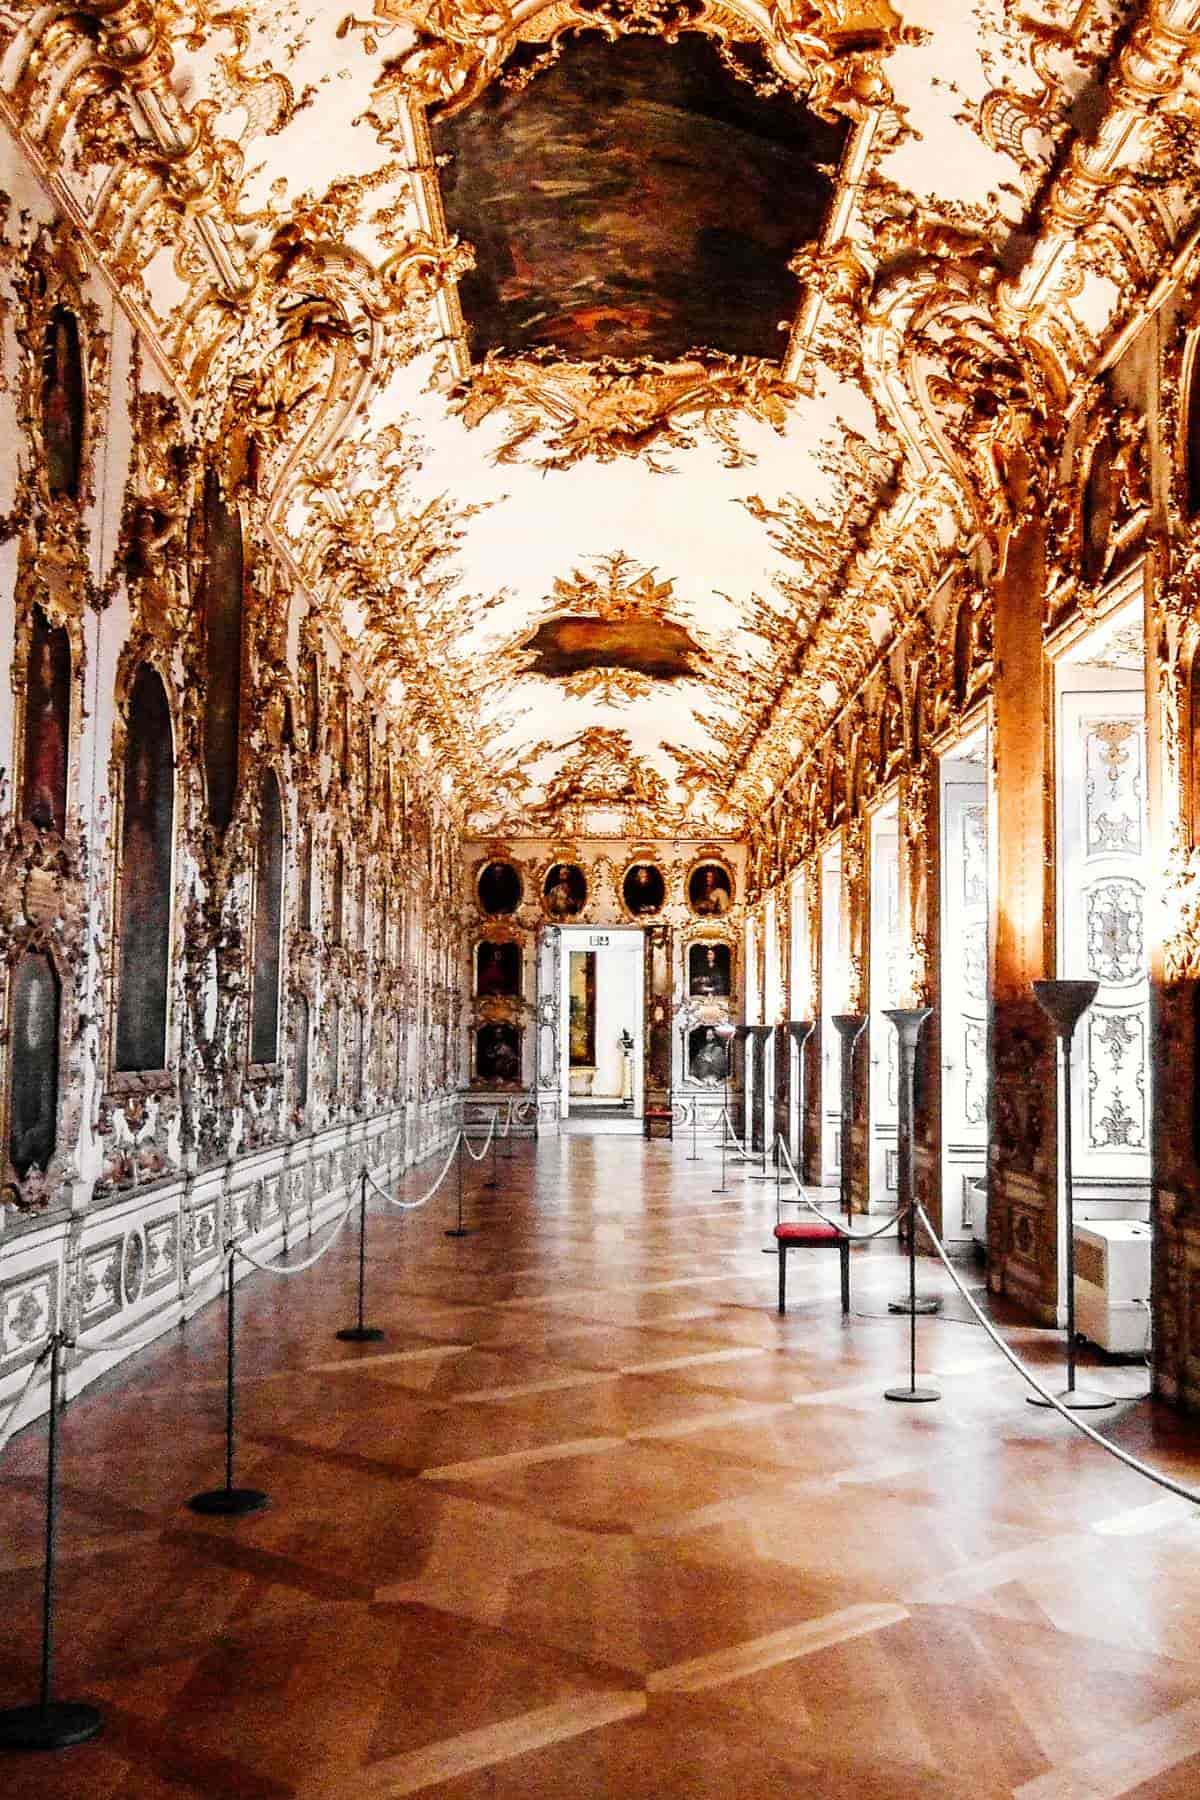 Inside the Residenz Palace ballroom with opulent decorations of gold and silk.